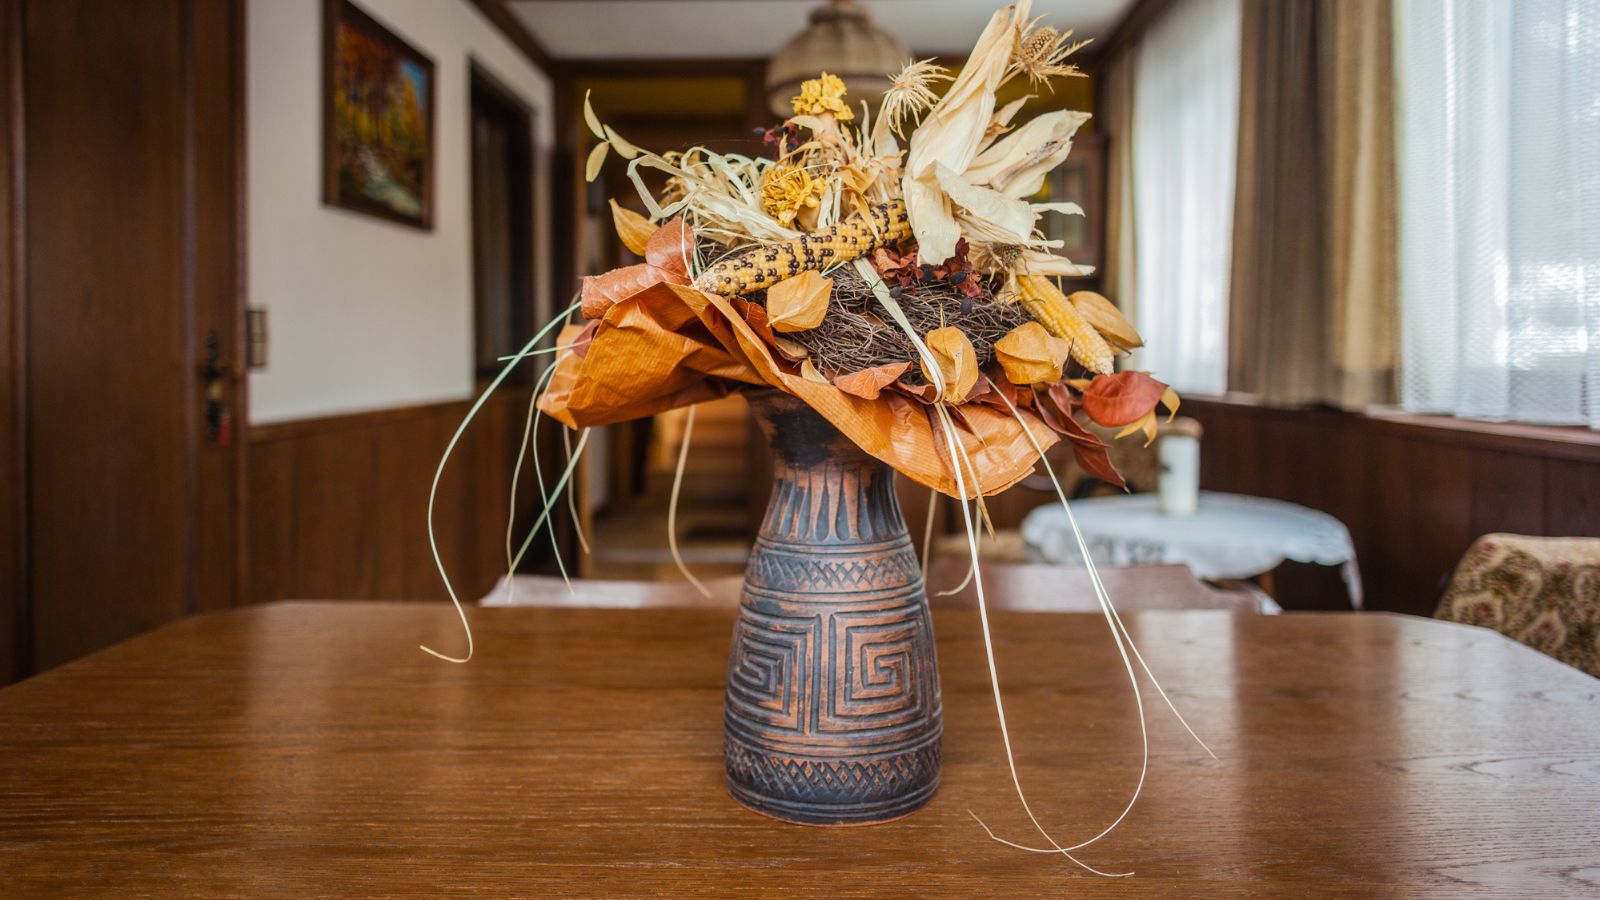 <p>While dried flower arrangements were a popular way to add a touch of nature to boomer homes, they can now look dusty and outdated. Opt for fresh flowers or modern plant arrangements for a more vibrant and contemporary feel.</p>